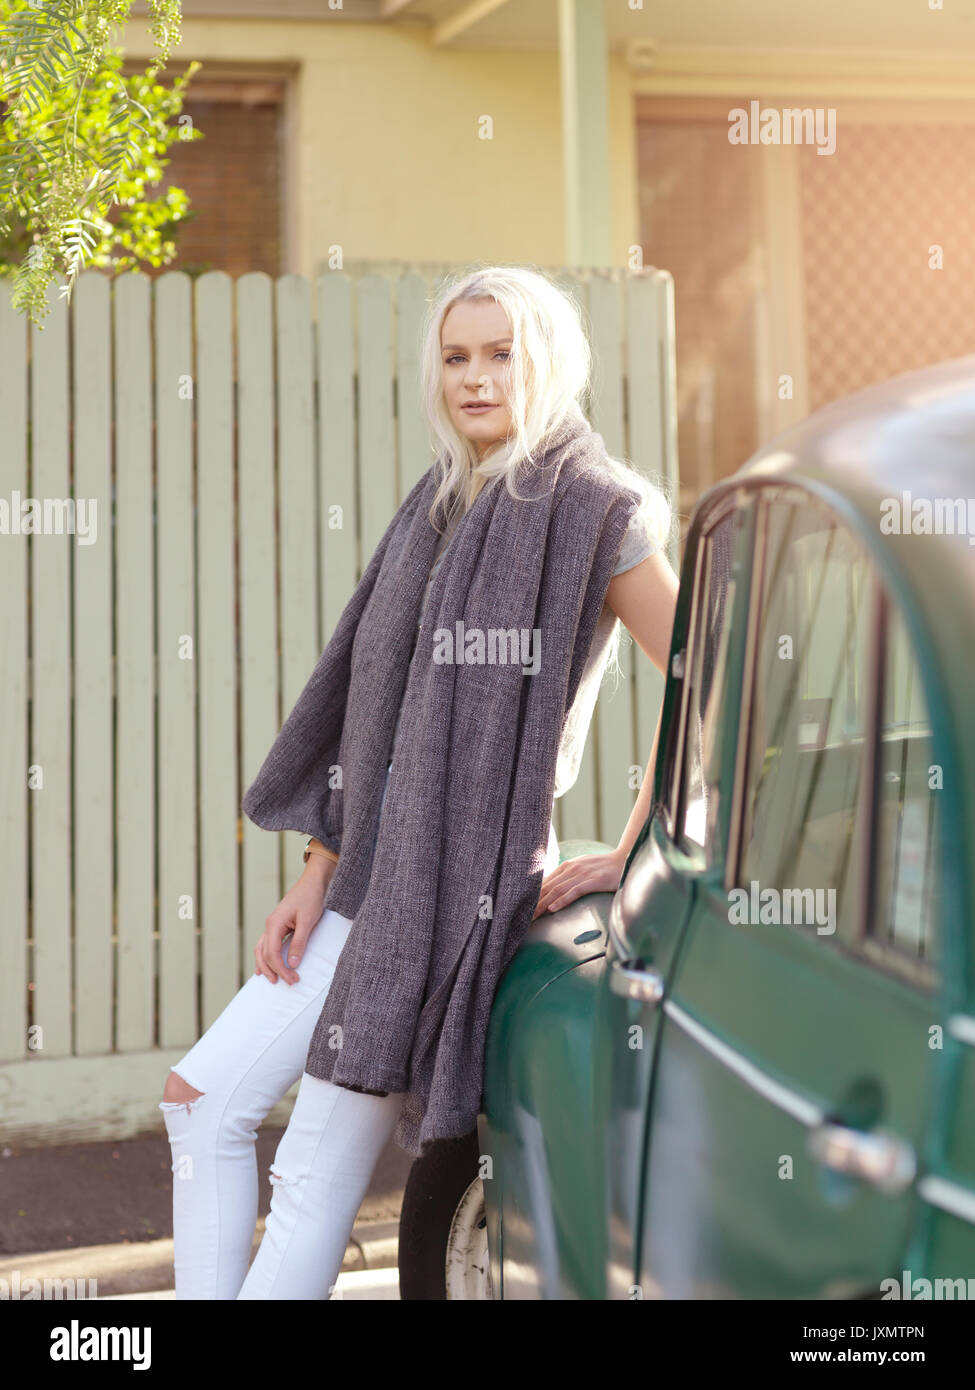 Young woman leaning against car, towel around neck Stock Photo